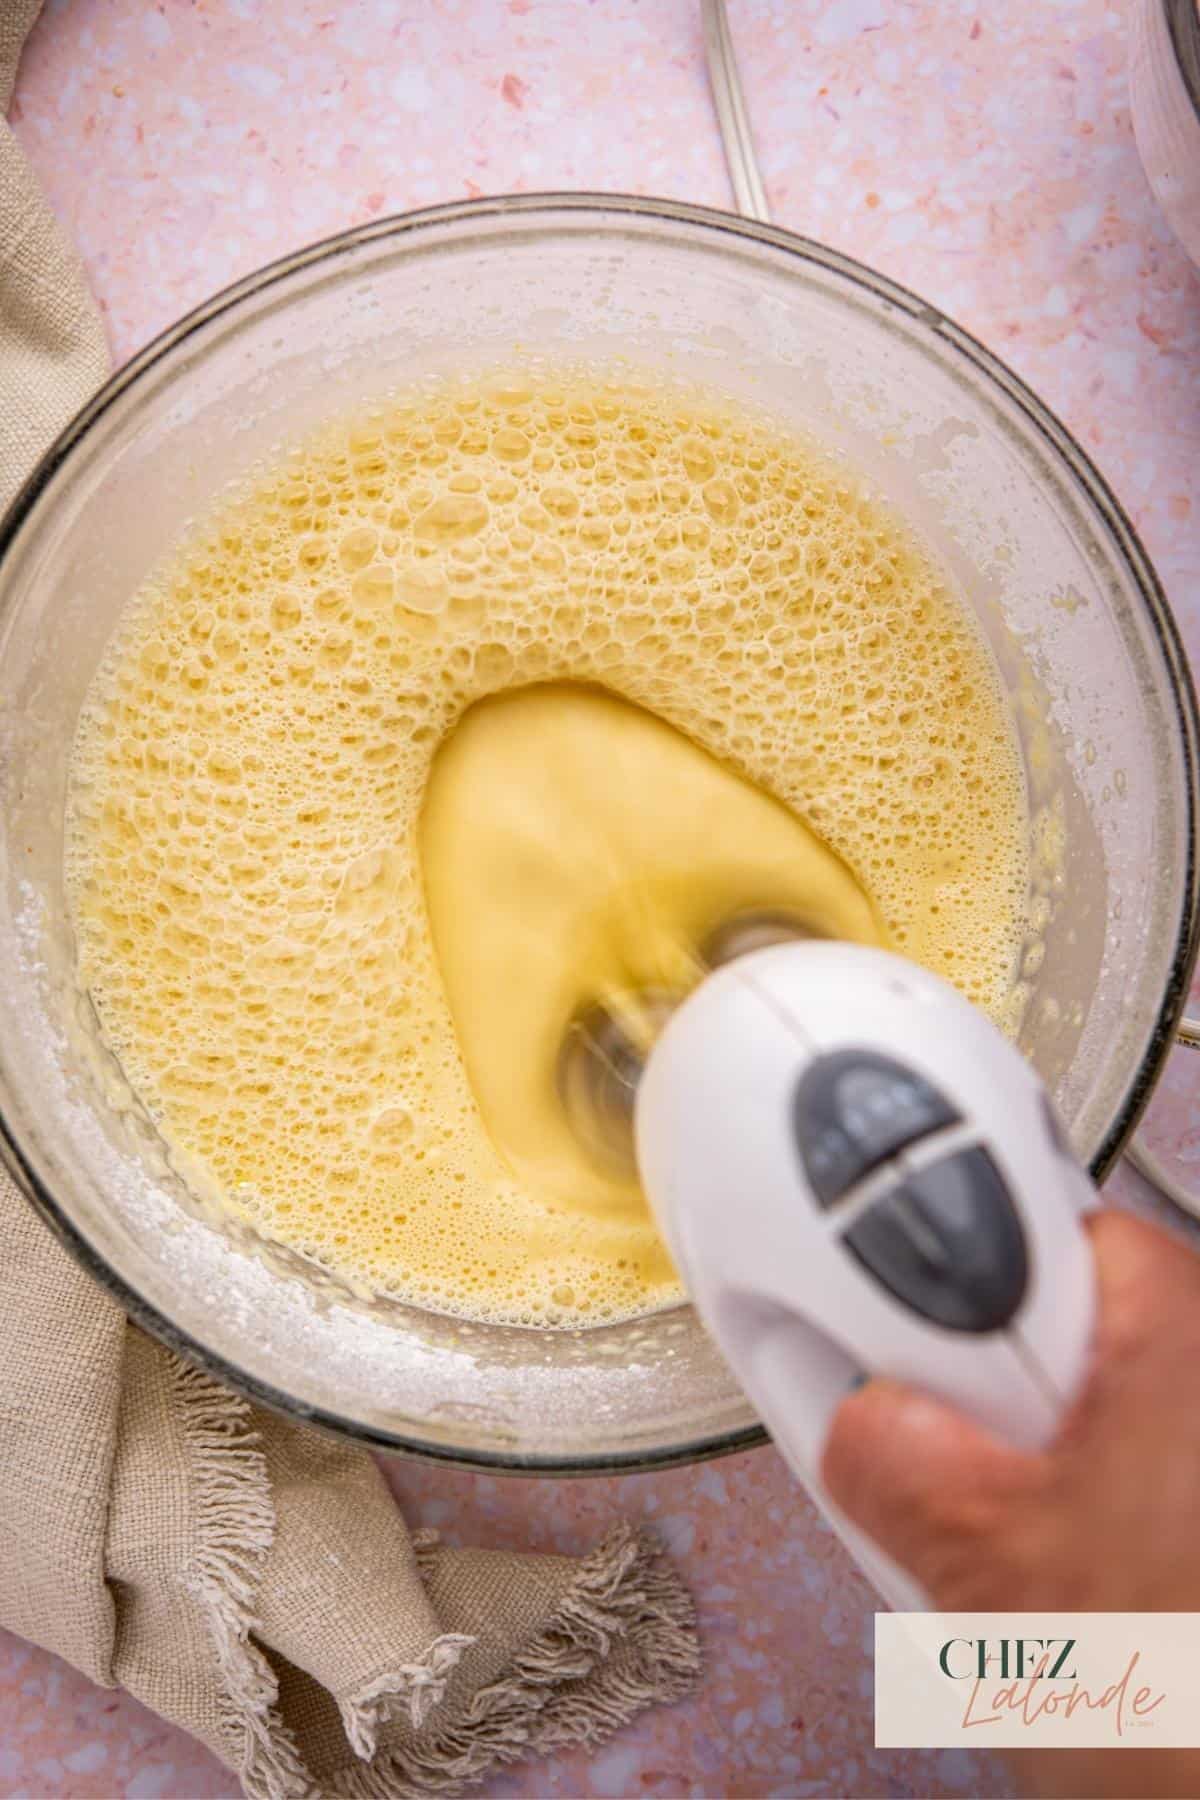 Using a hand mixer to combine all the ingredients together until smooth.